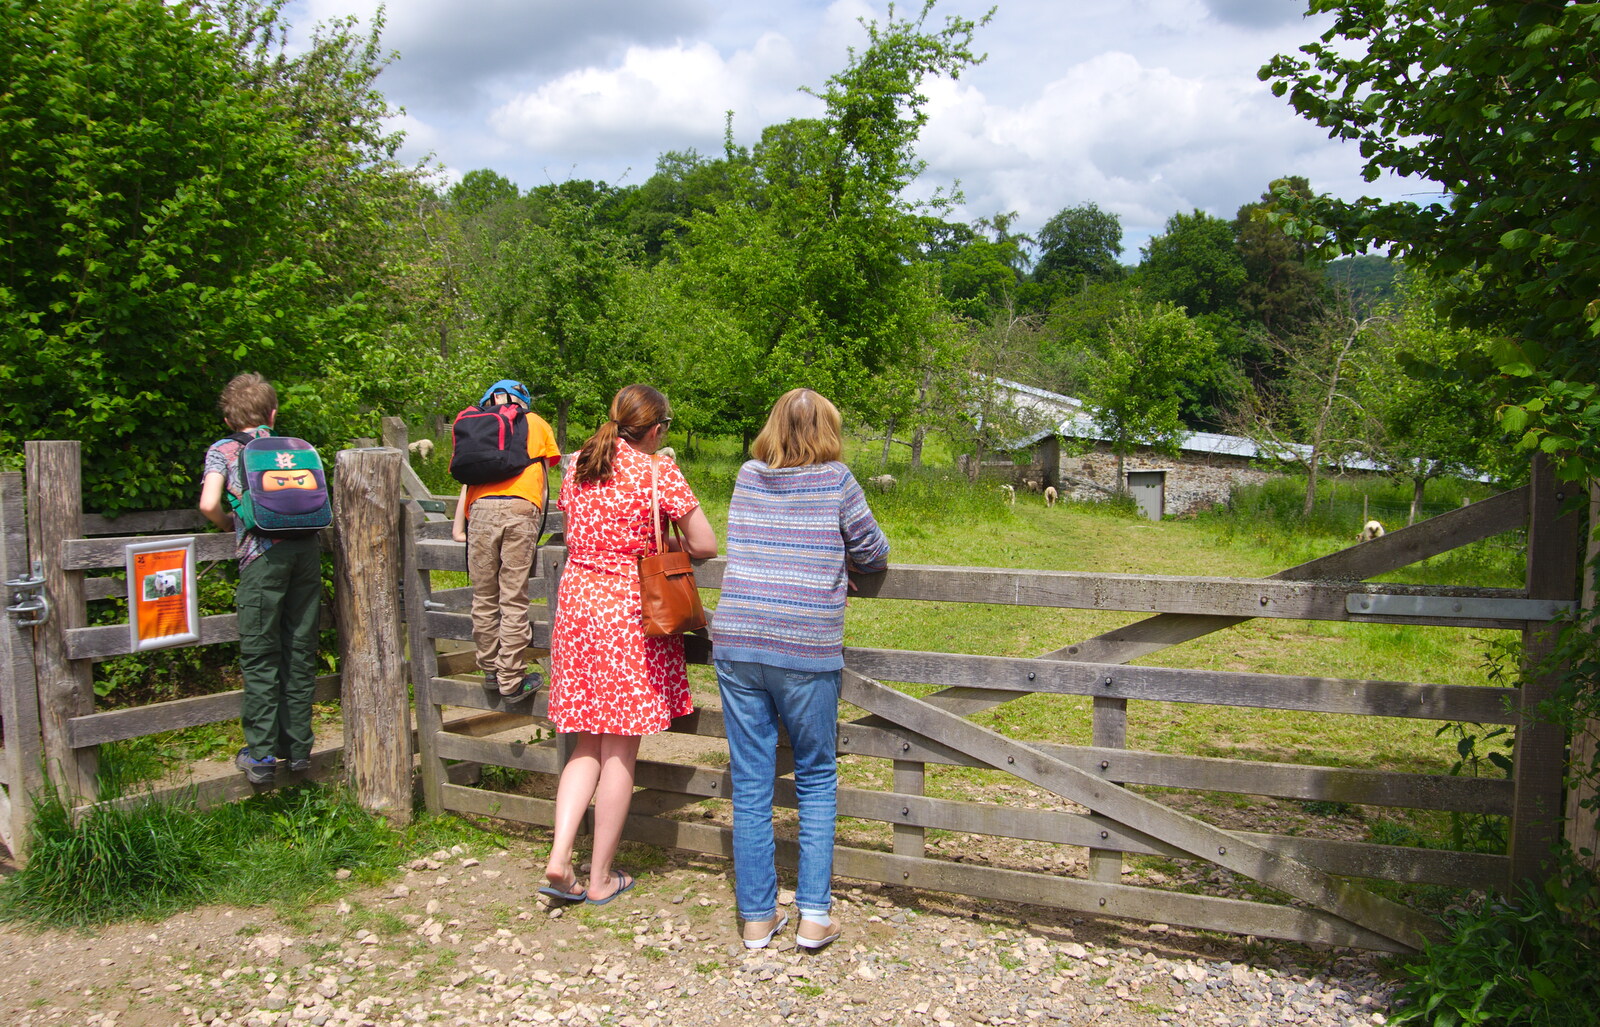 The gang hang on a gate and watch the sheep from Chagford Lido and a Trip to Parke, Bovey Tracey, Devon - 25th May 2019